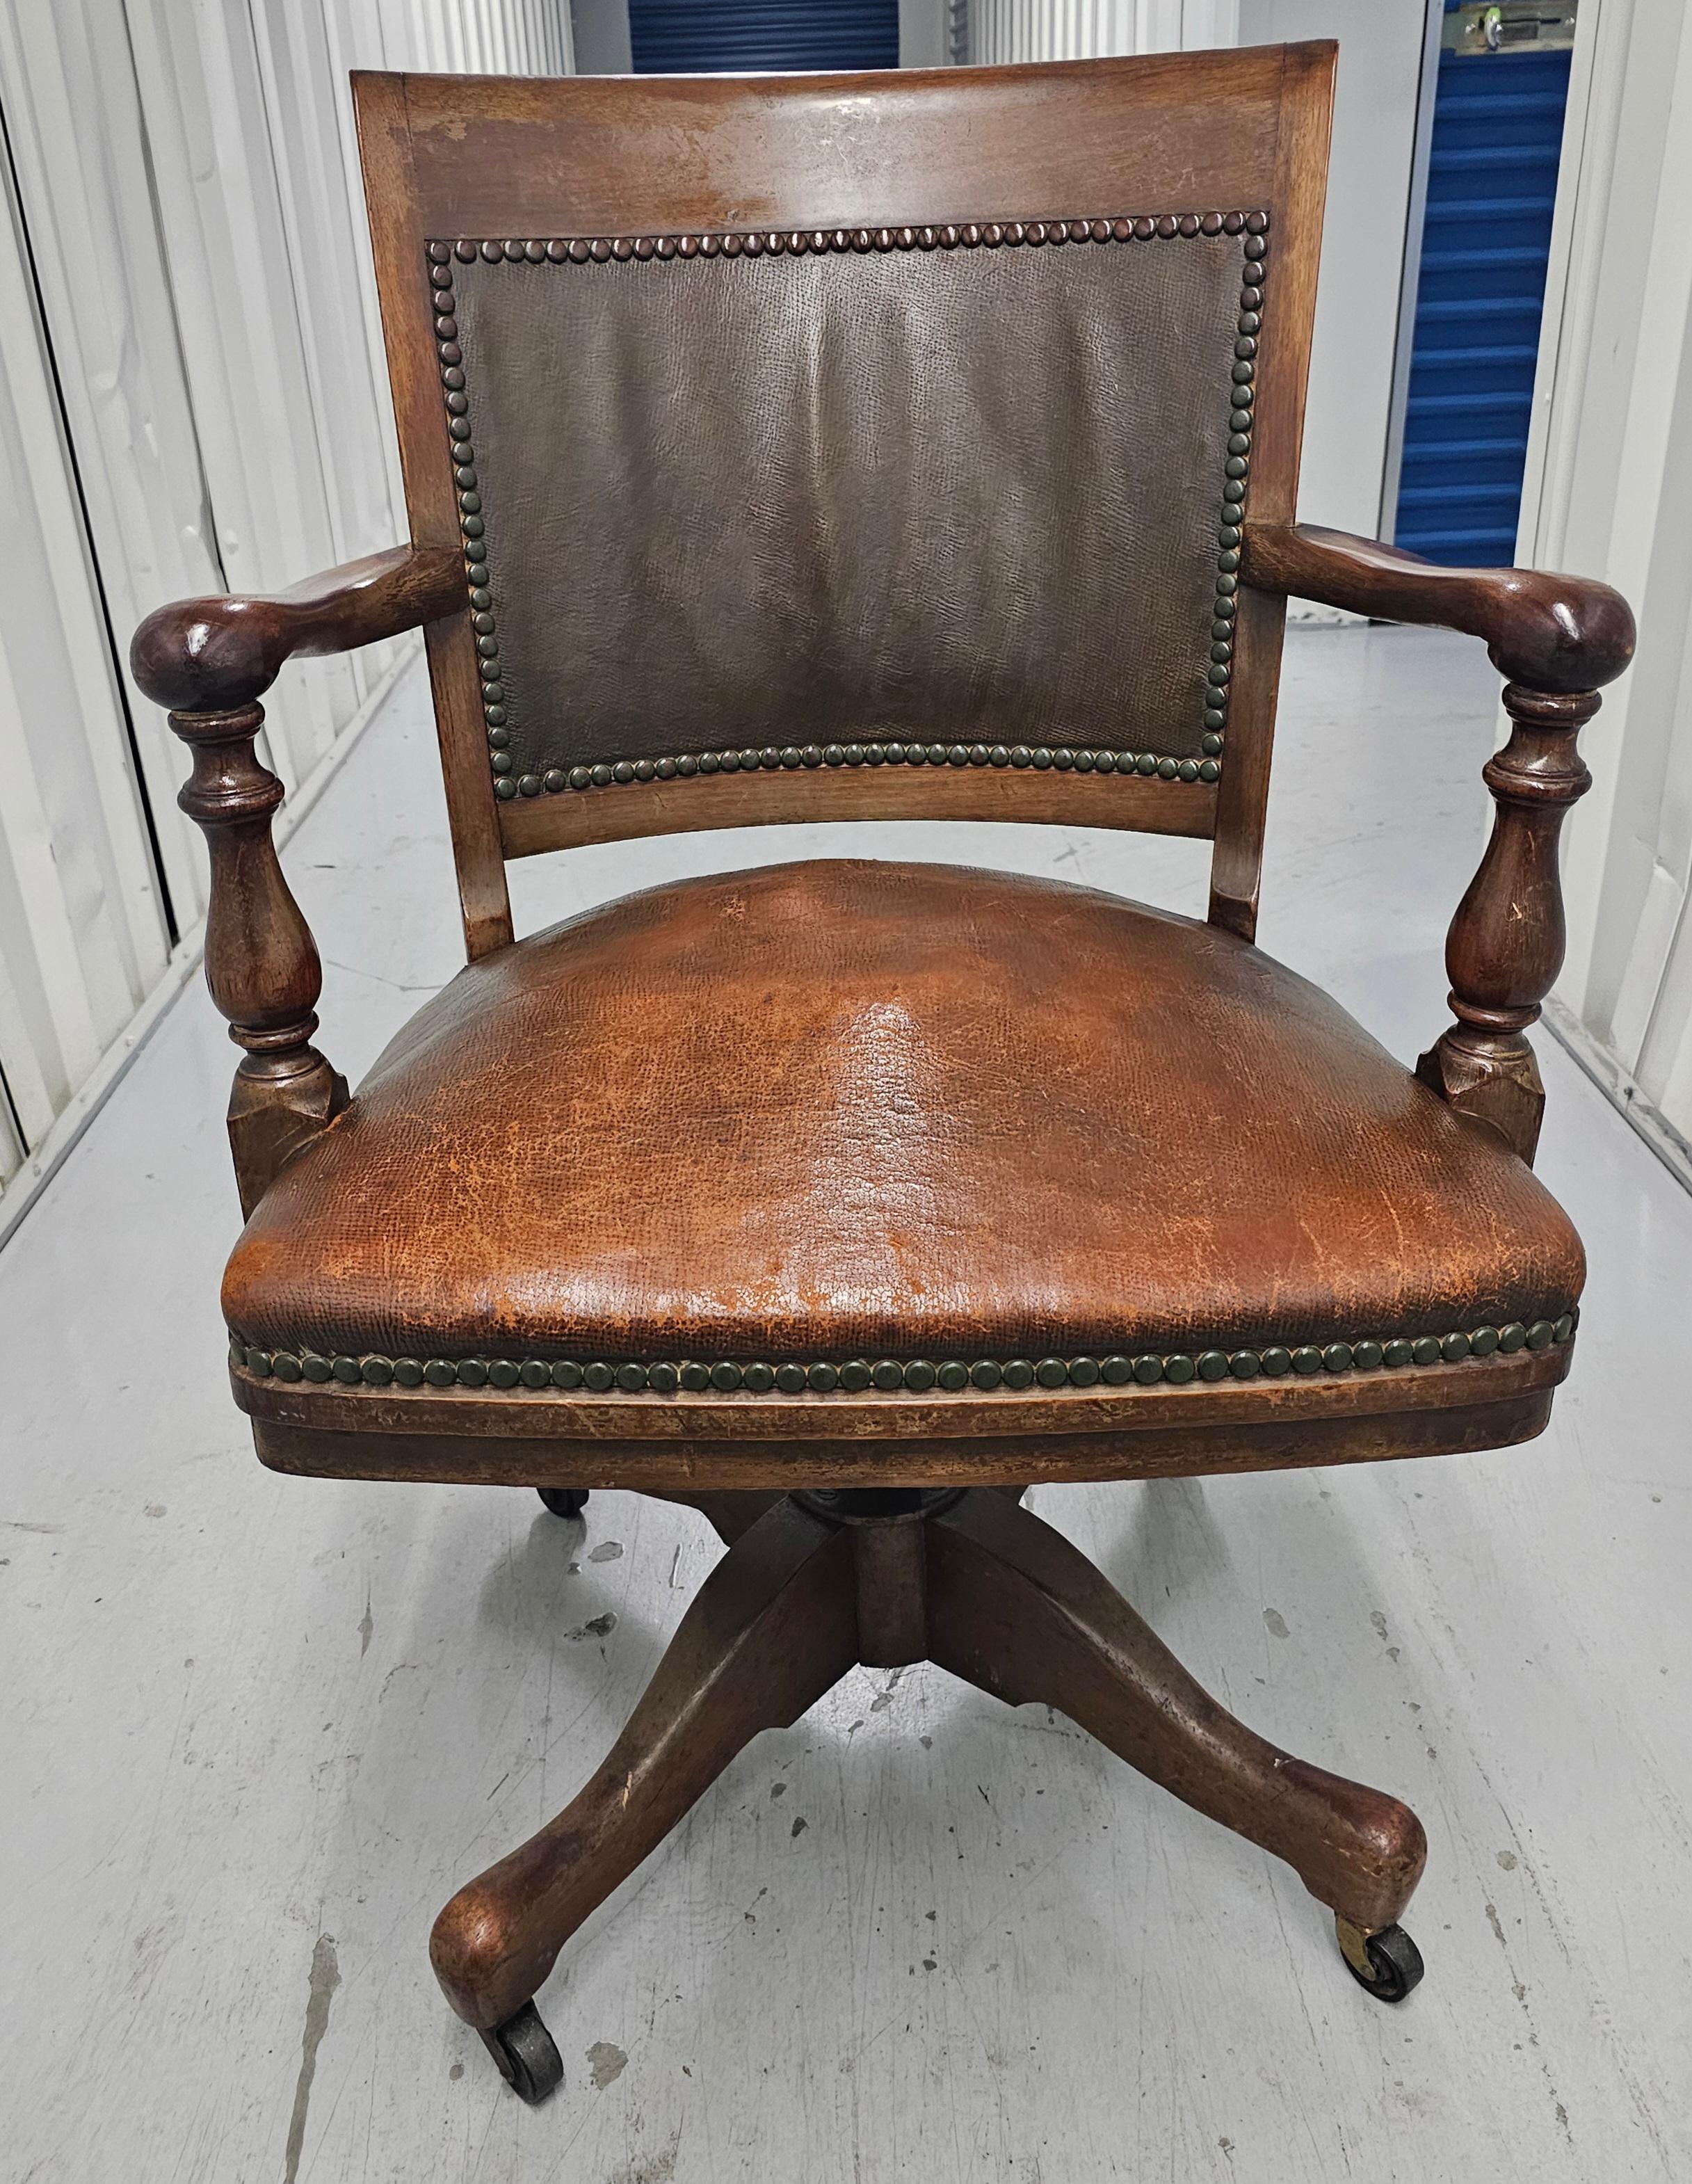 20th Century 1900s Sikes Furniture Walnut & Leather Upholstered Desk Chair For Sale